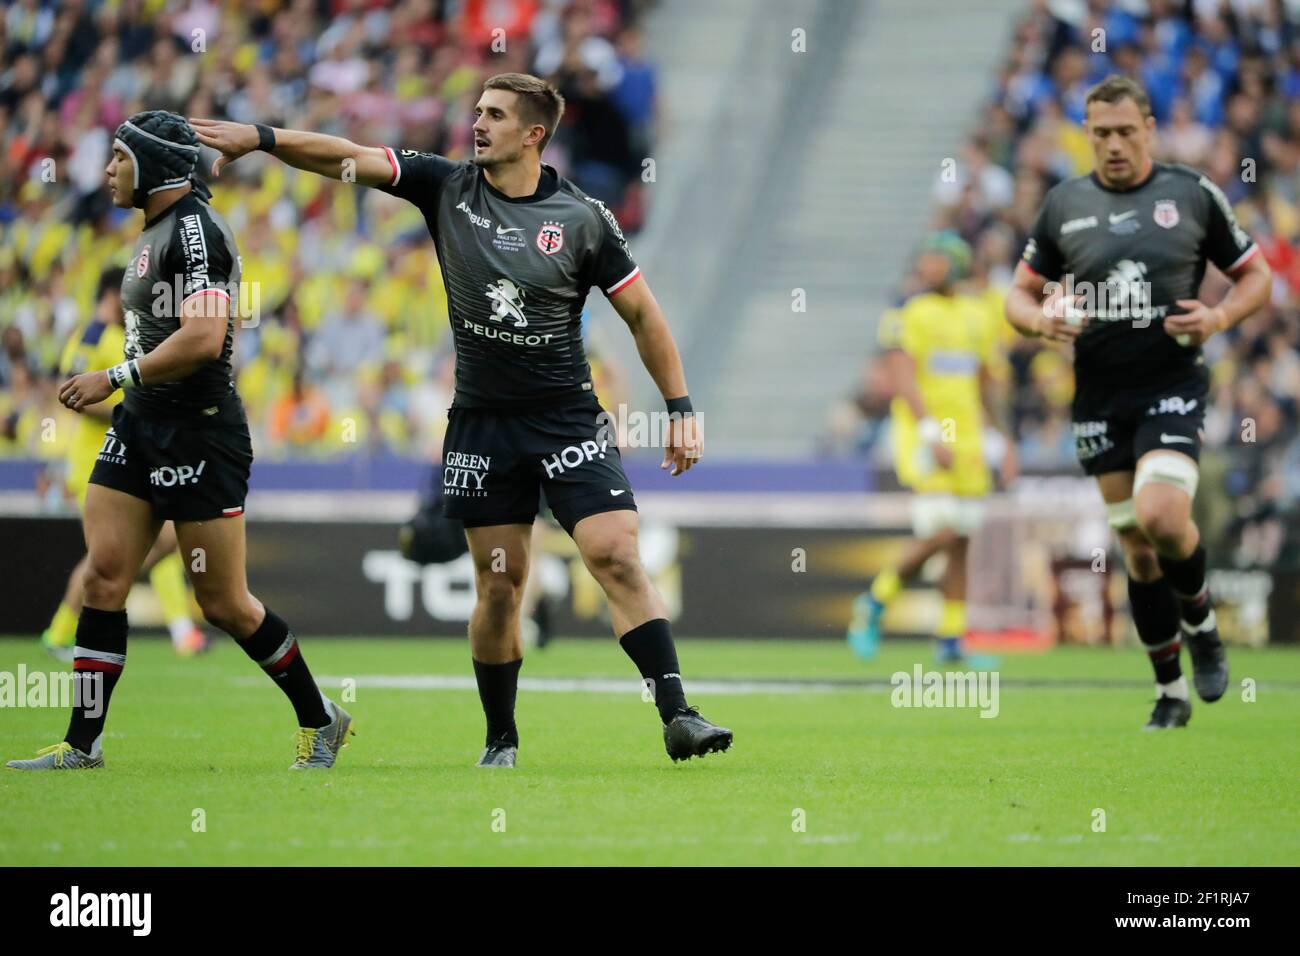 Thomas Ramos (Stade Toulousain) scored a penalty during the French  championship Top 14 Final rugby union match between Stade Toulousain and  ASM Clermont on June 15, 2019 at Stade de France in